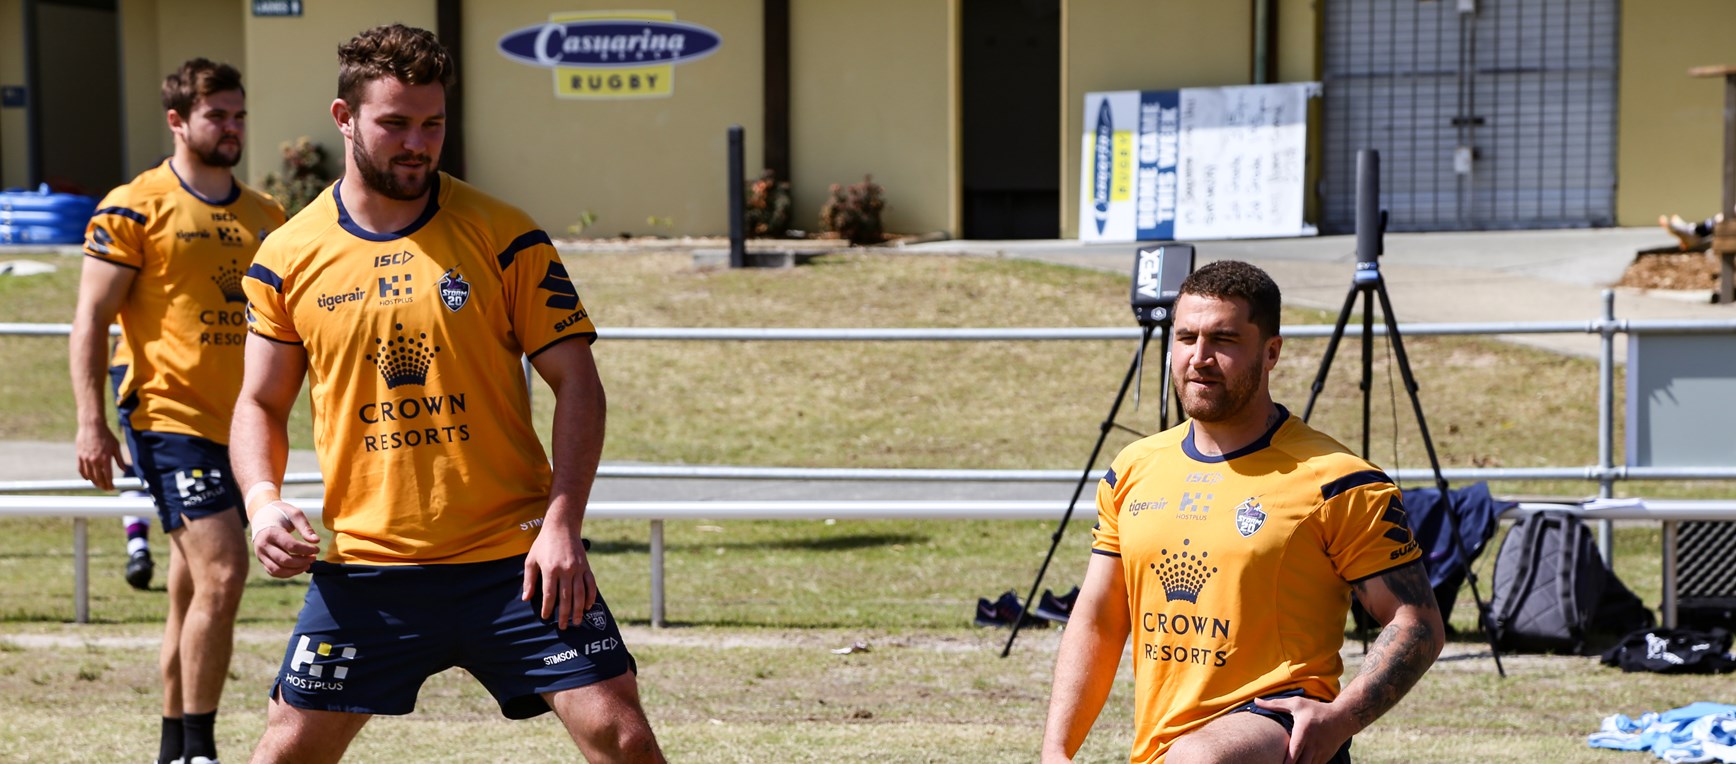 In Pictures: Gold Coast training camp